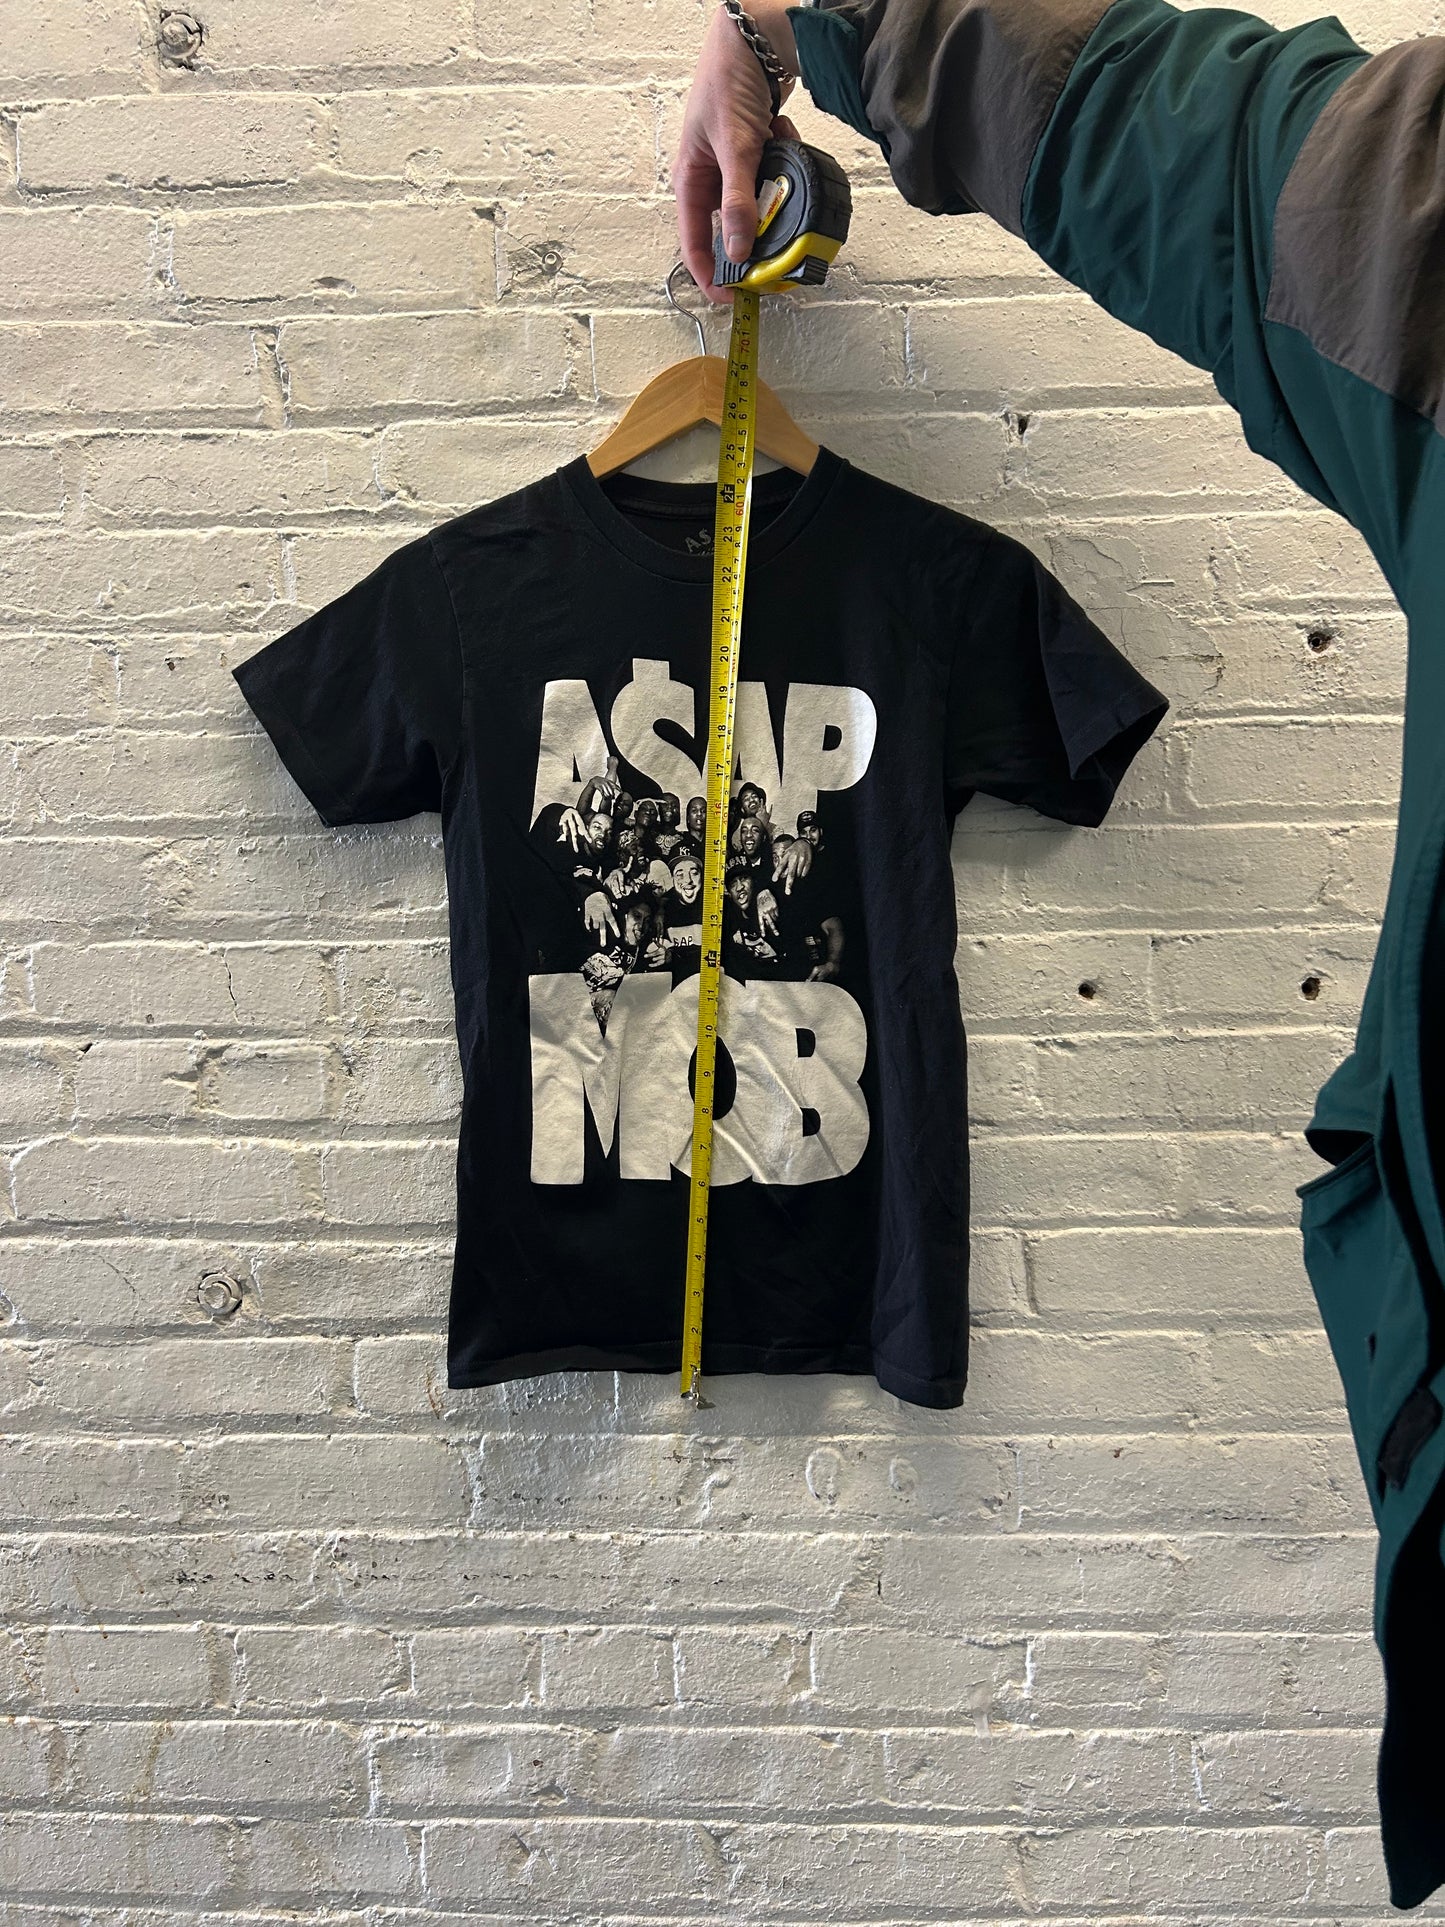 A$AP Mob Tee - Small